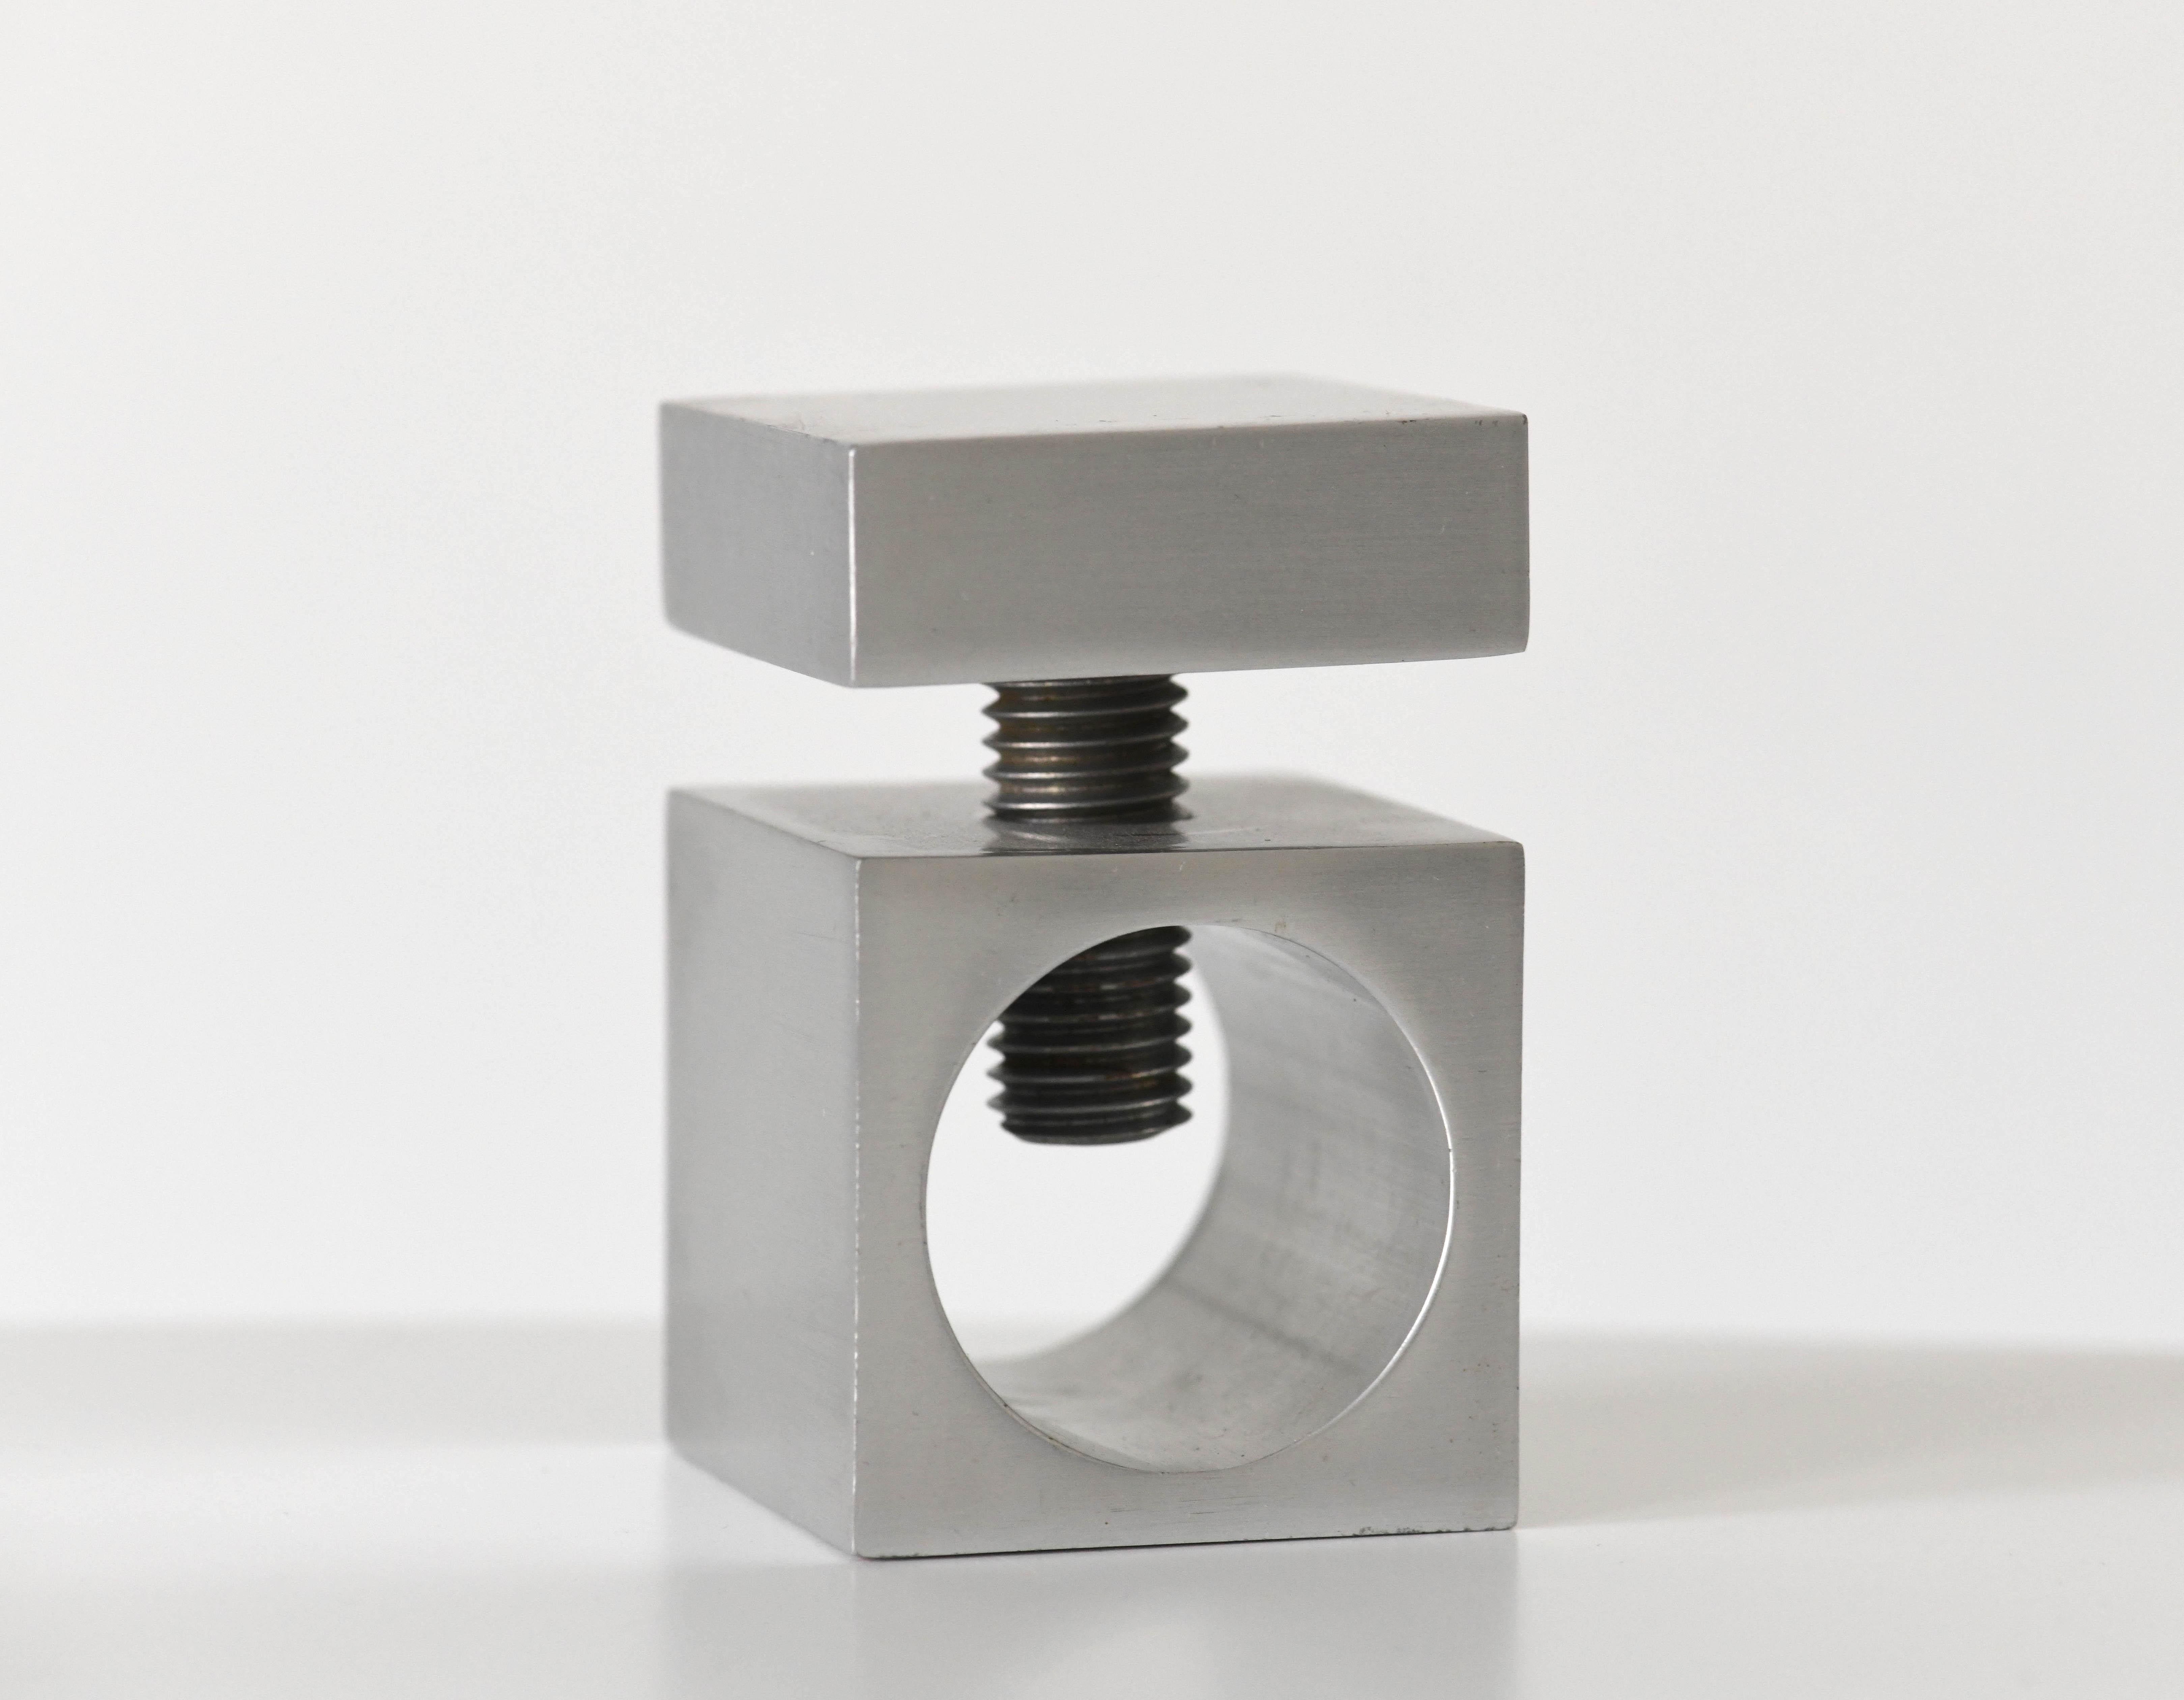 Wonderful functional sculptural nut cracker by French designer by Pierre Vandel. Made in solid aluminum.  